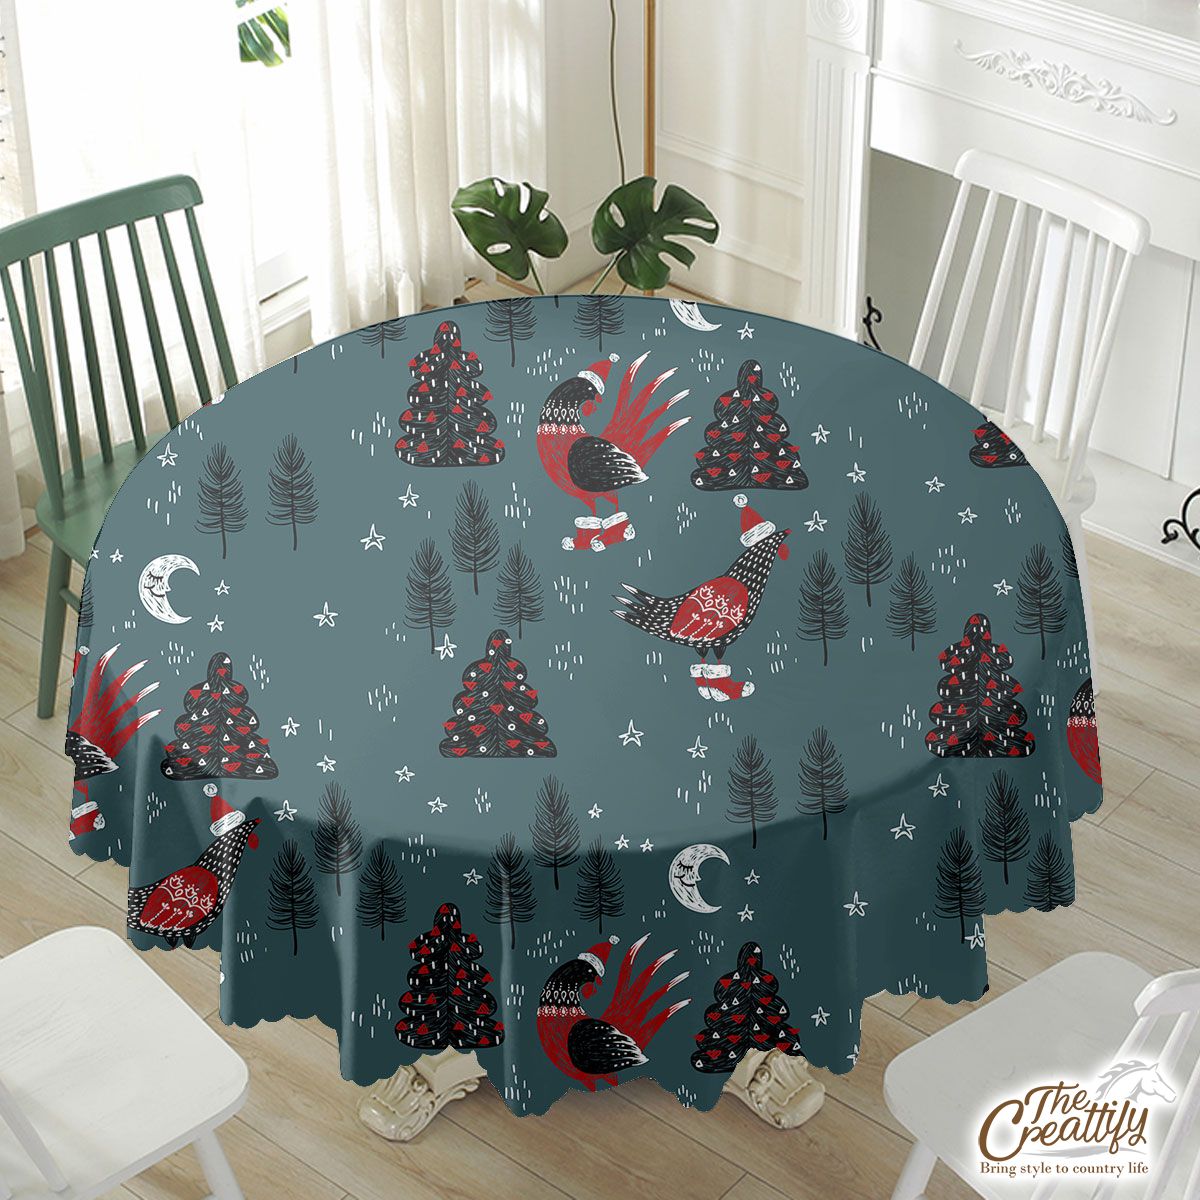 Christmas Turkey With Santa Hat, Sweater And Red Socks On The Pine Tree Background Waterproof Tablecloth